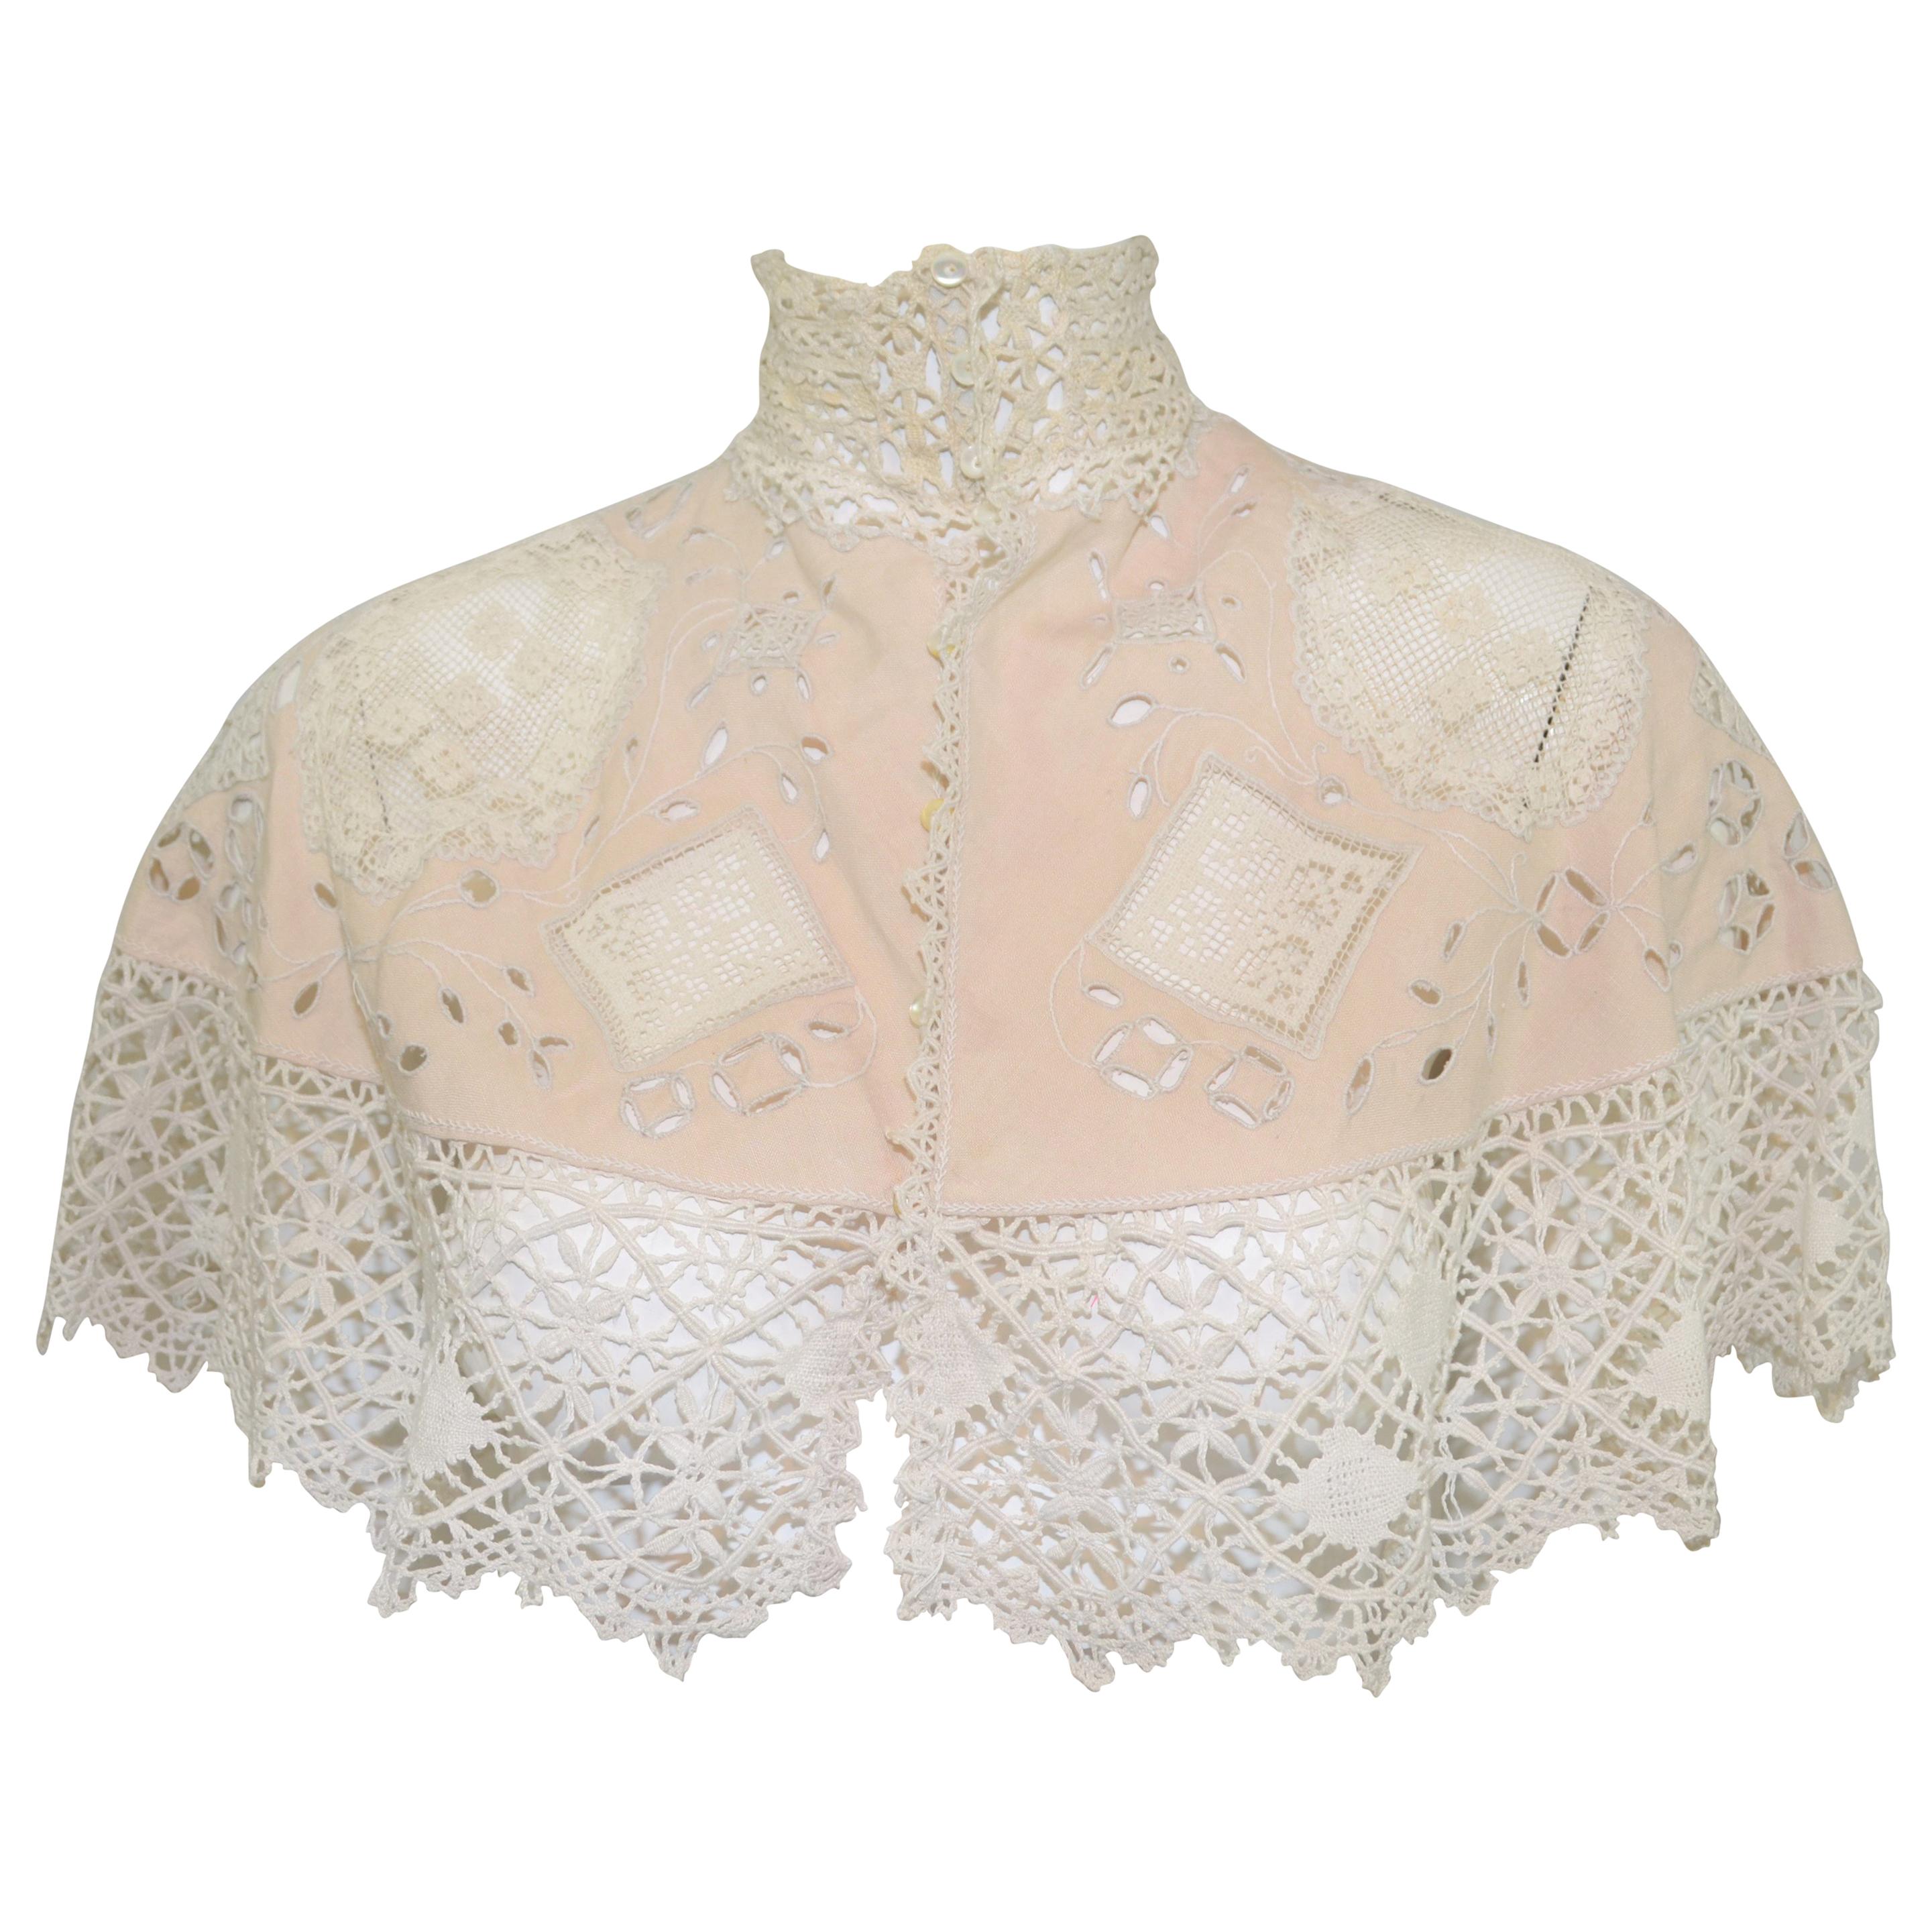 Vintage Victorian Crochet Knit Capelet with Eyelet